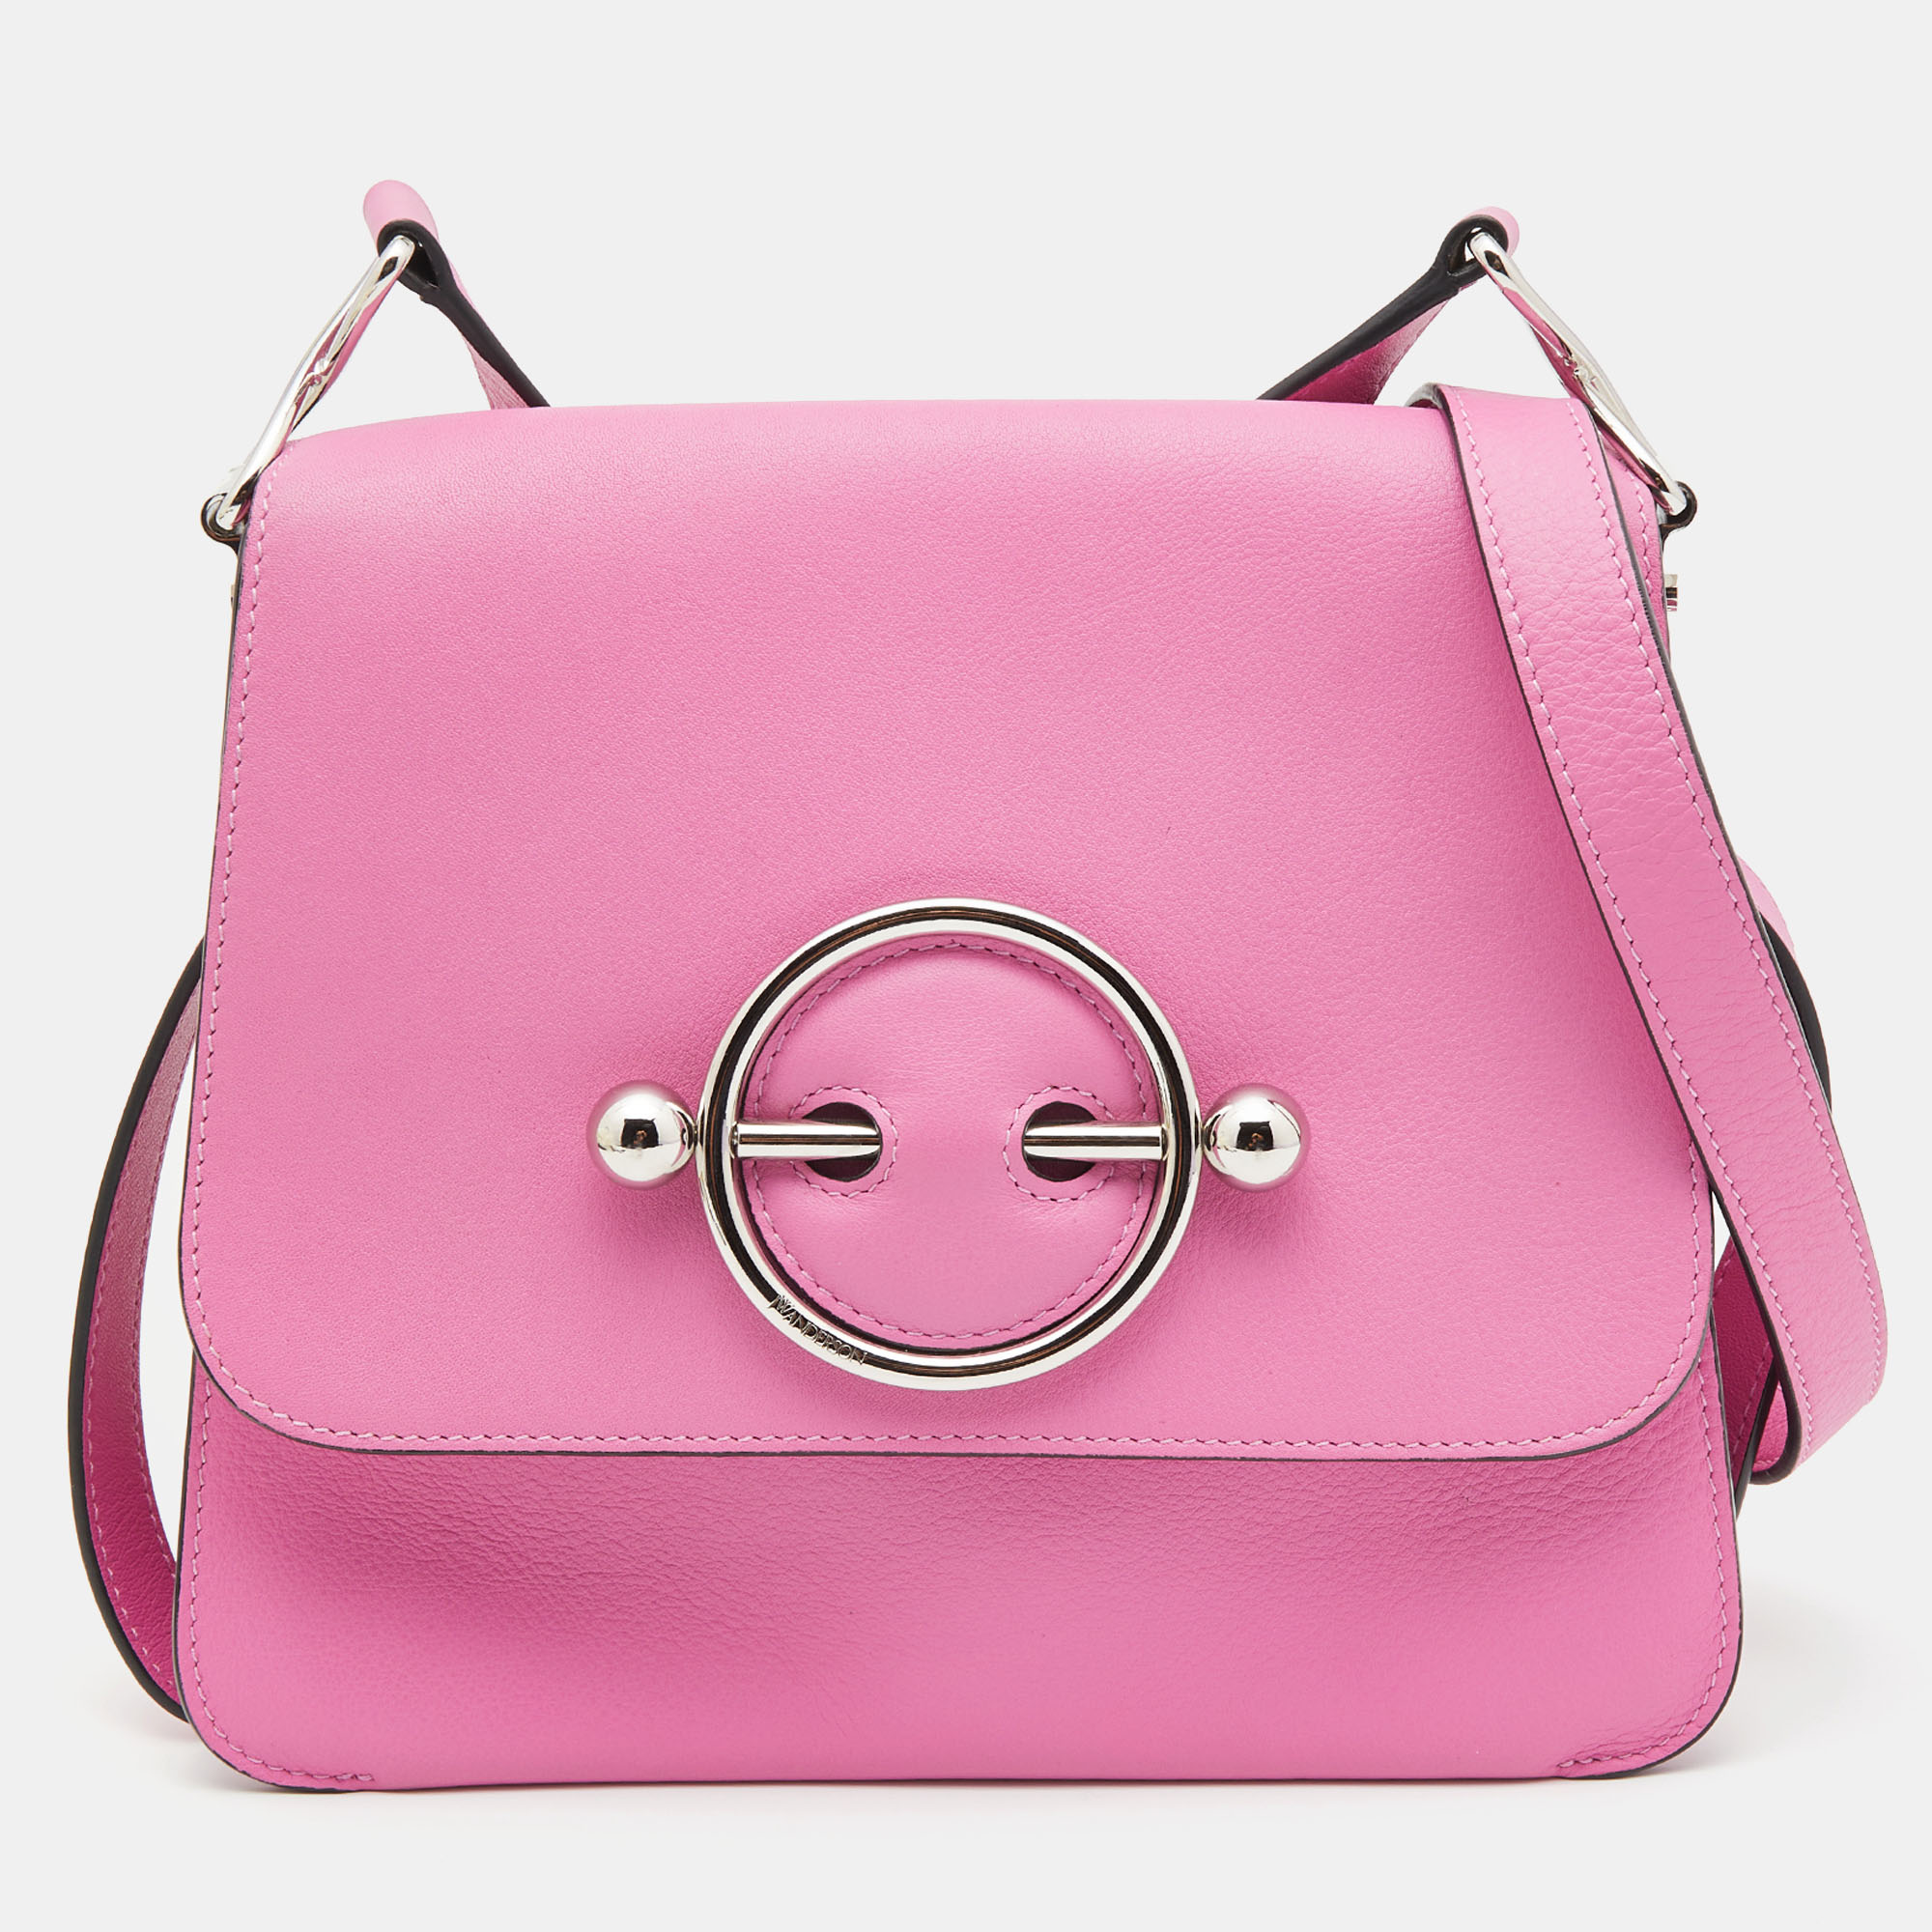 Pre-owned Jw Anderson Pink Leather Disc Crossbody Bag